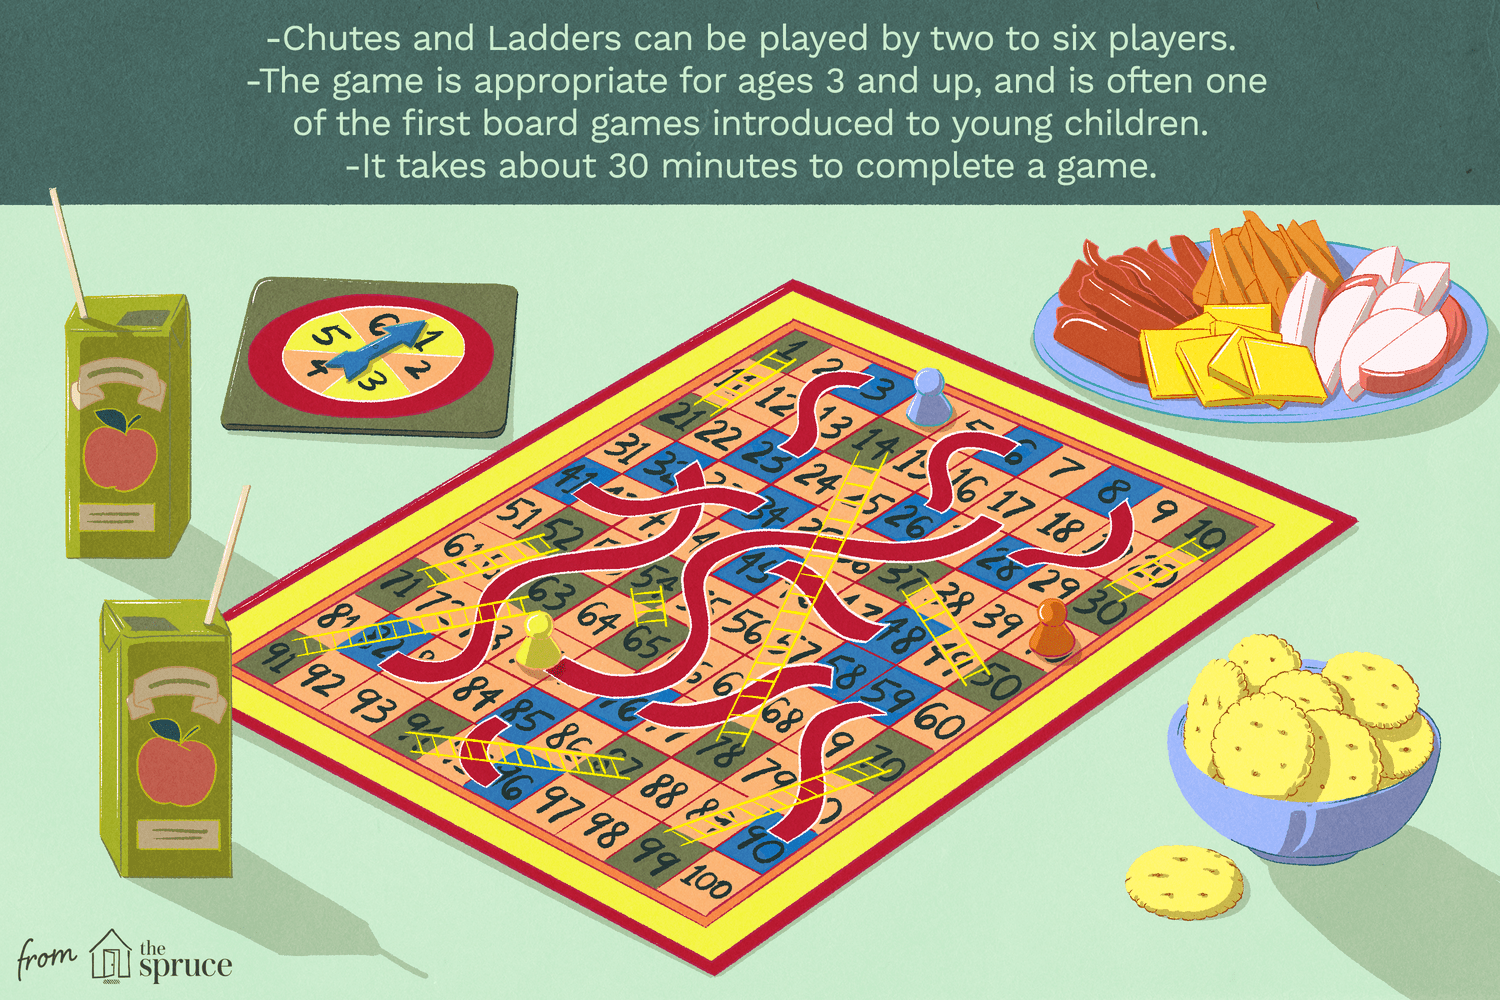 chutes and ladders illustration